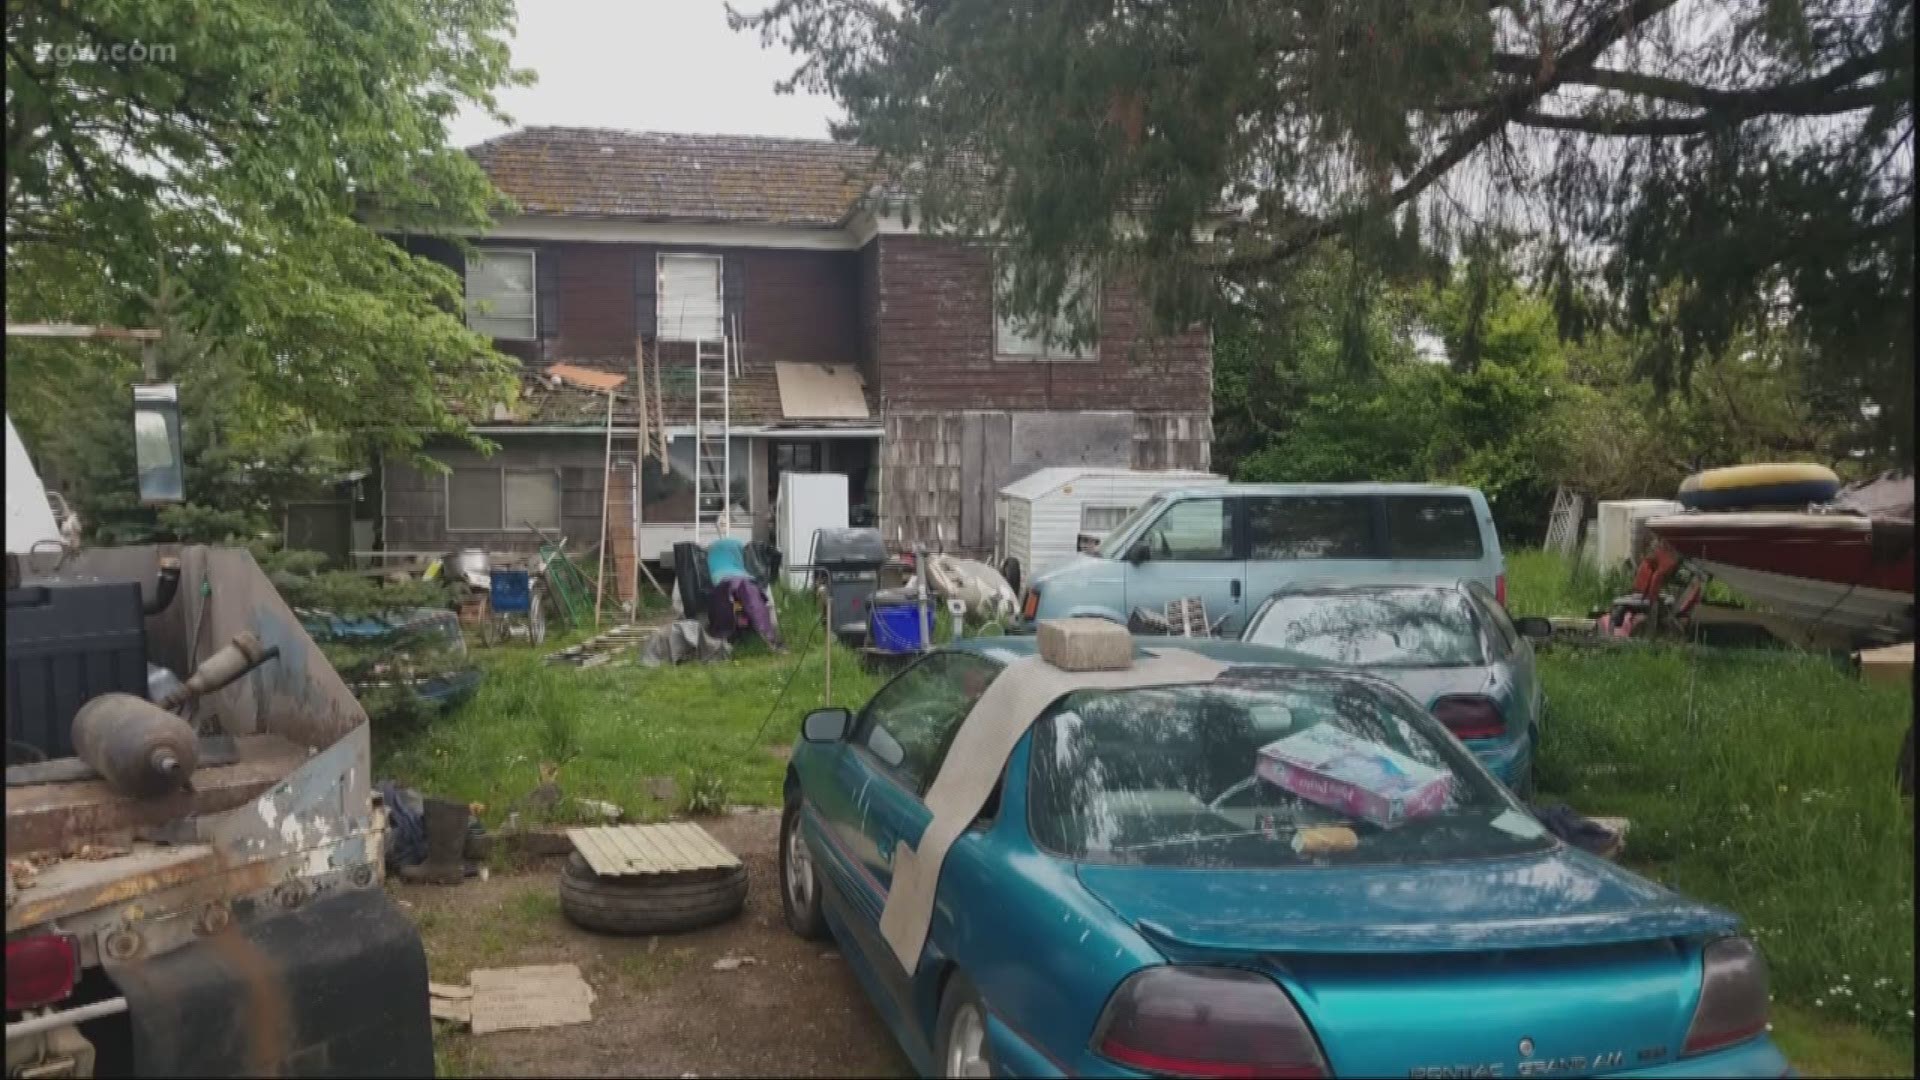 We look at what rights squatters have in Oregon.